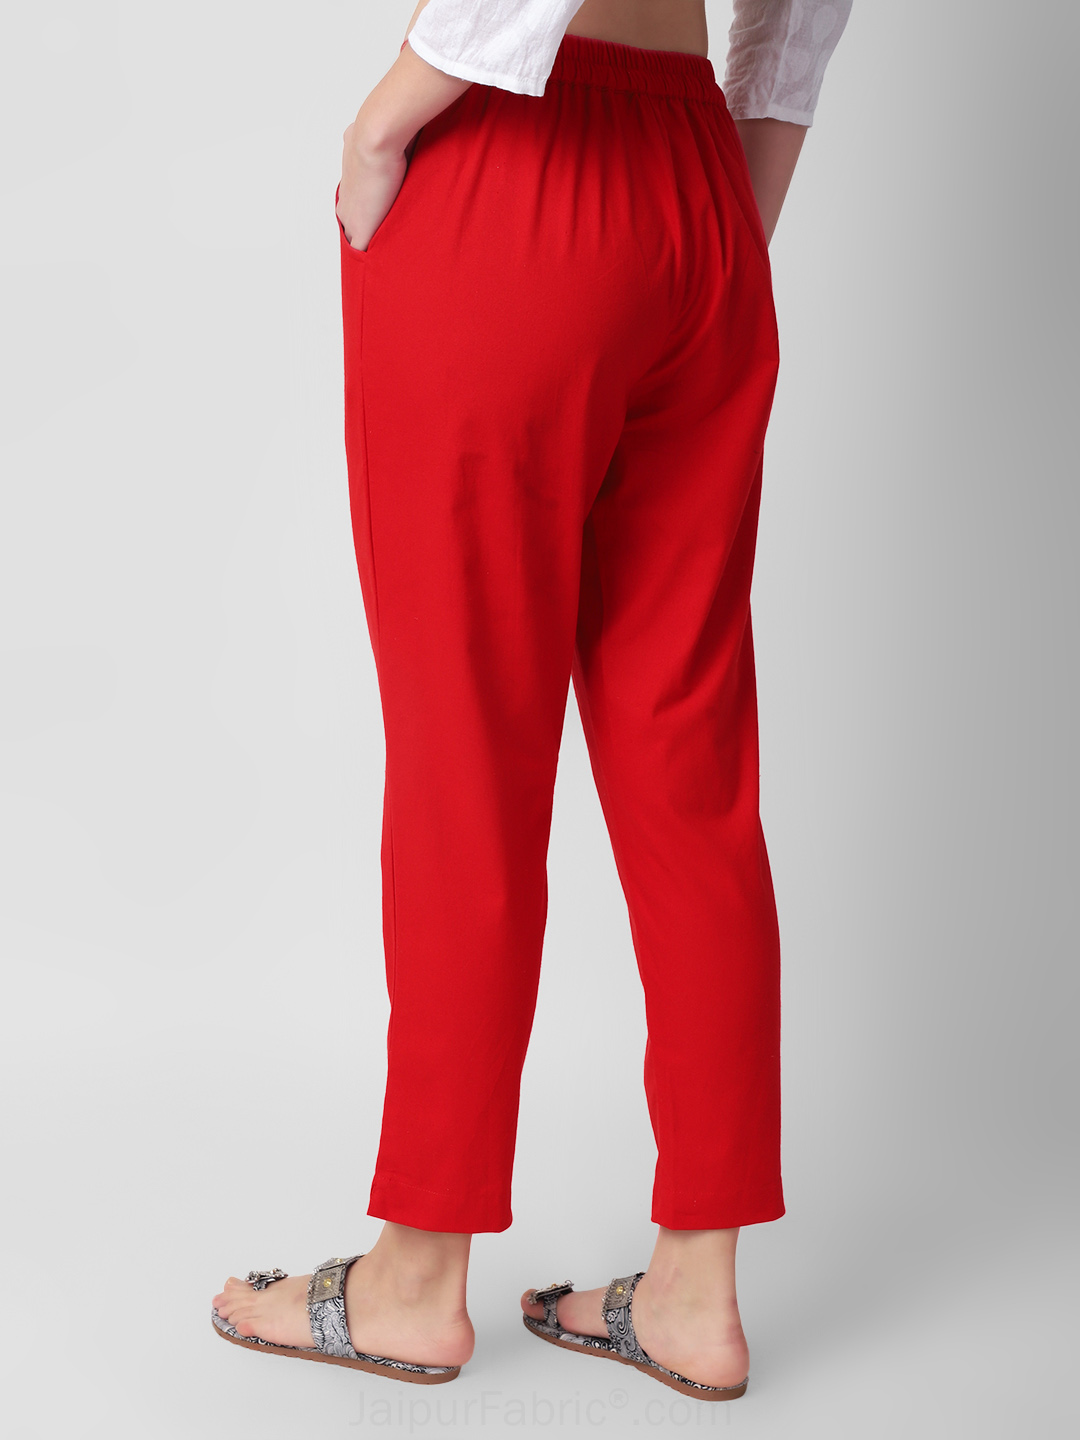 Scarlet Comfort Women Cotton Pants casual and semi formal daily trousers